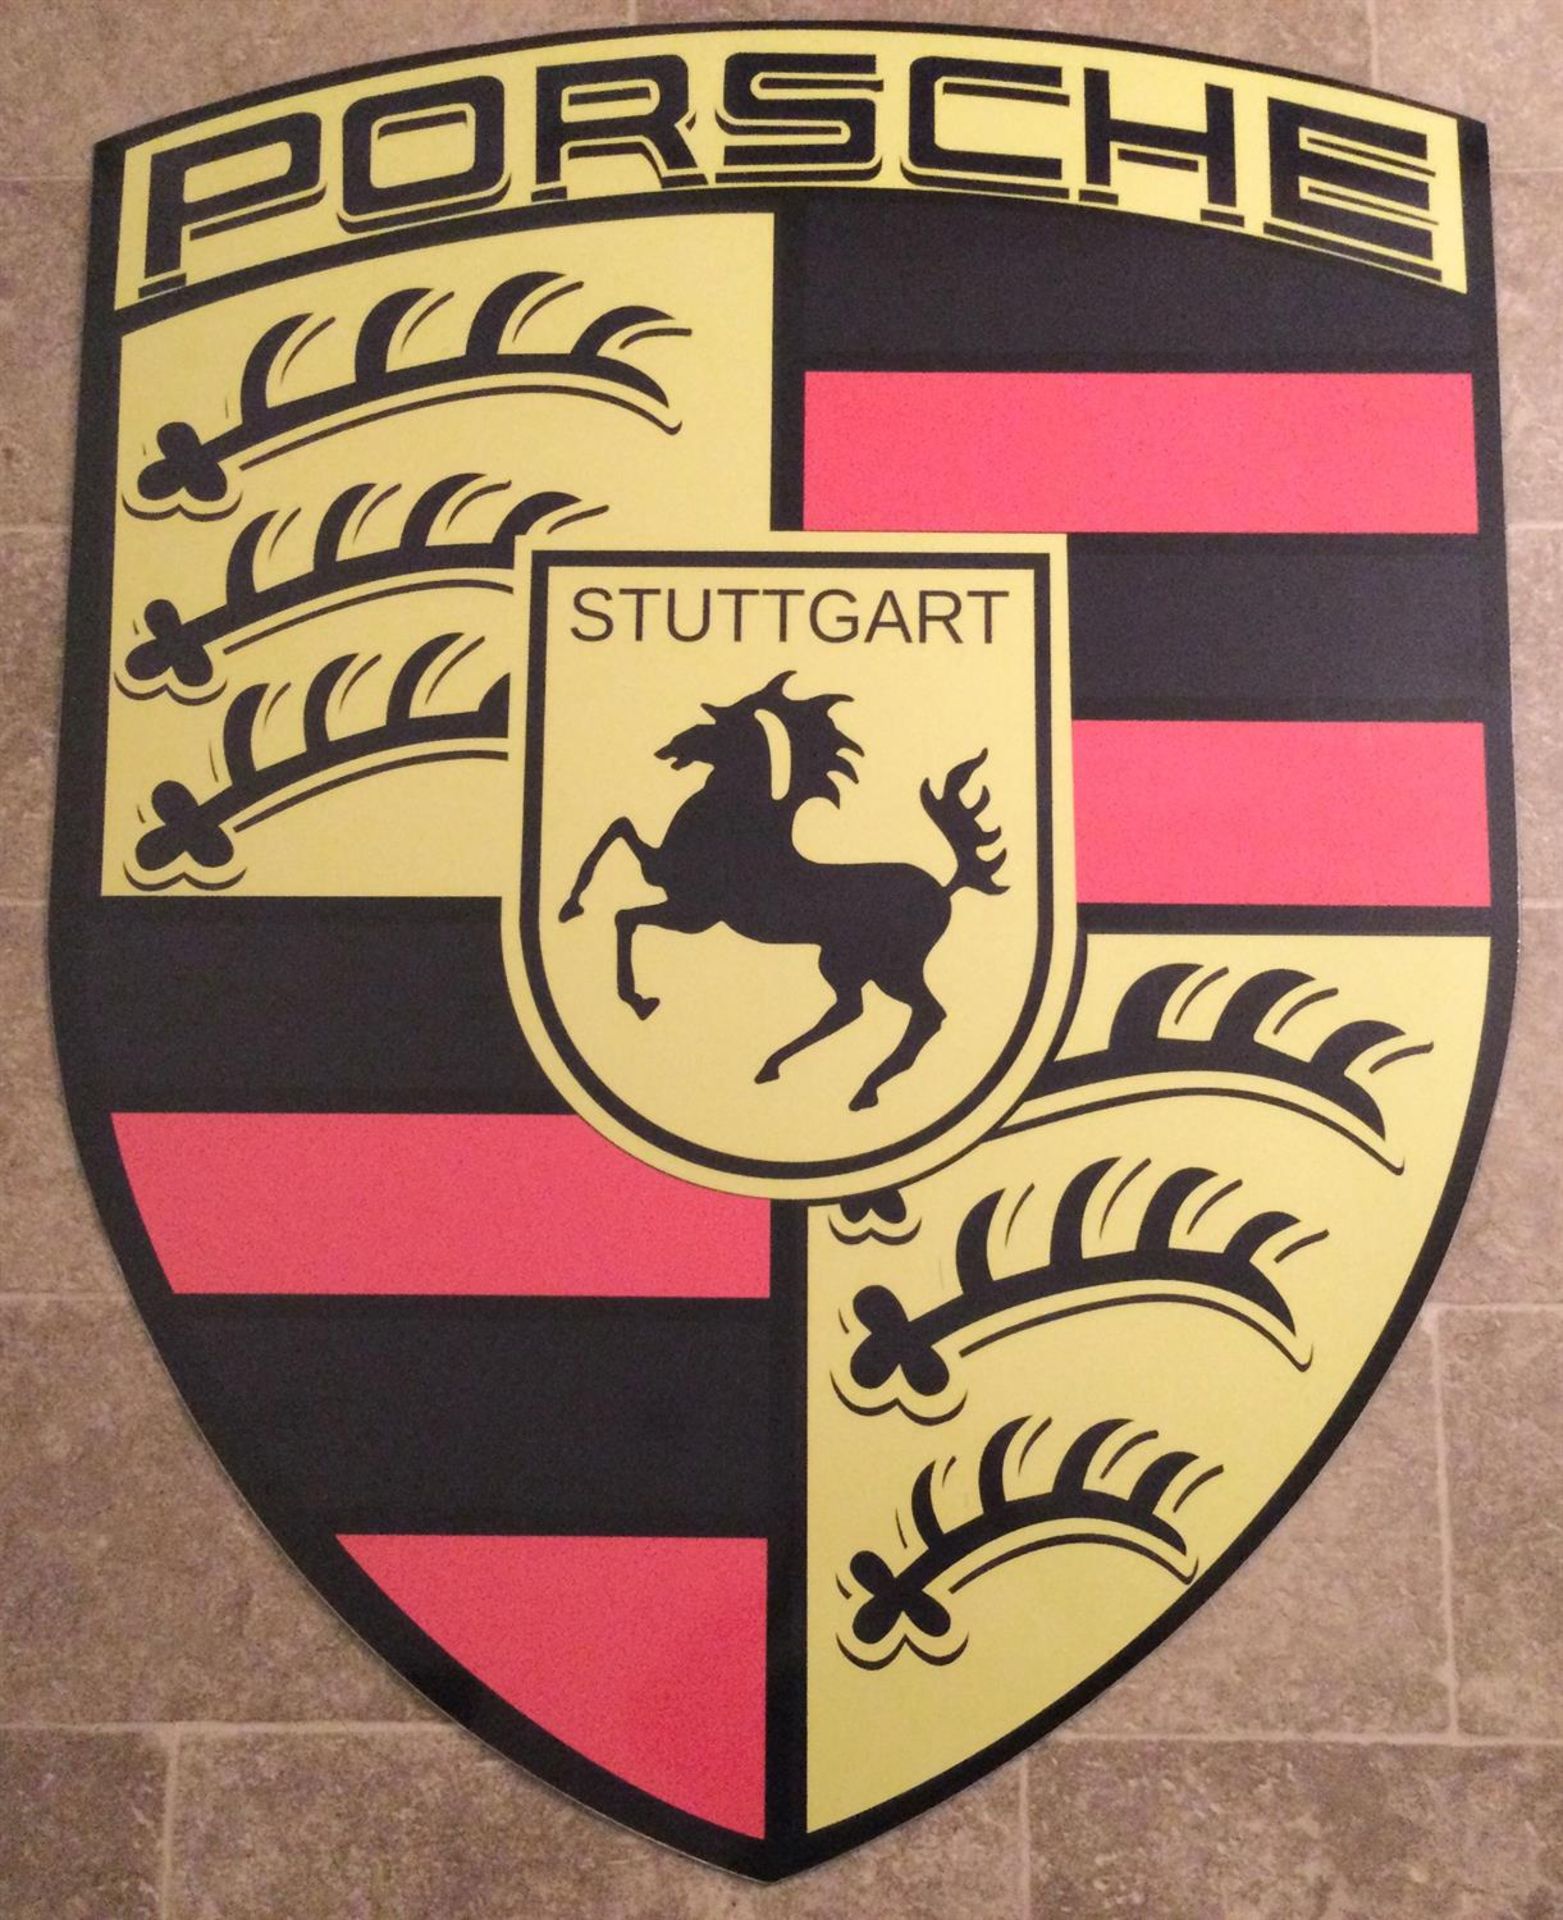 A very large and impressive metal Porsche dealer-type wall or garage shield sign